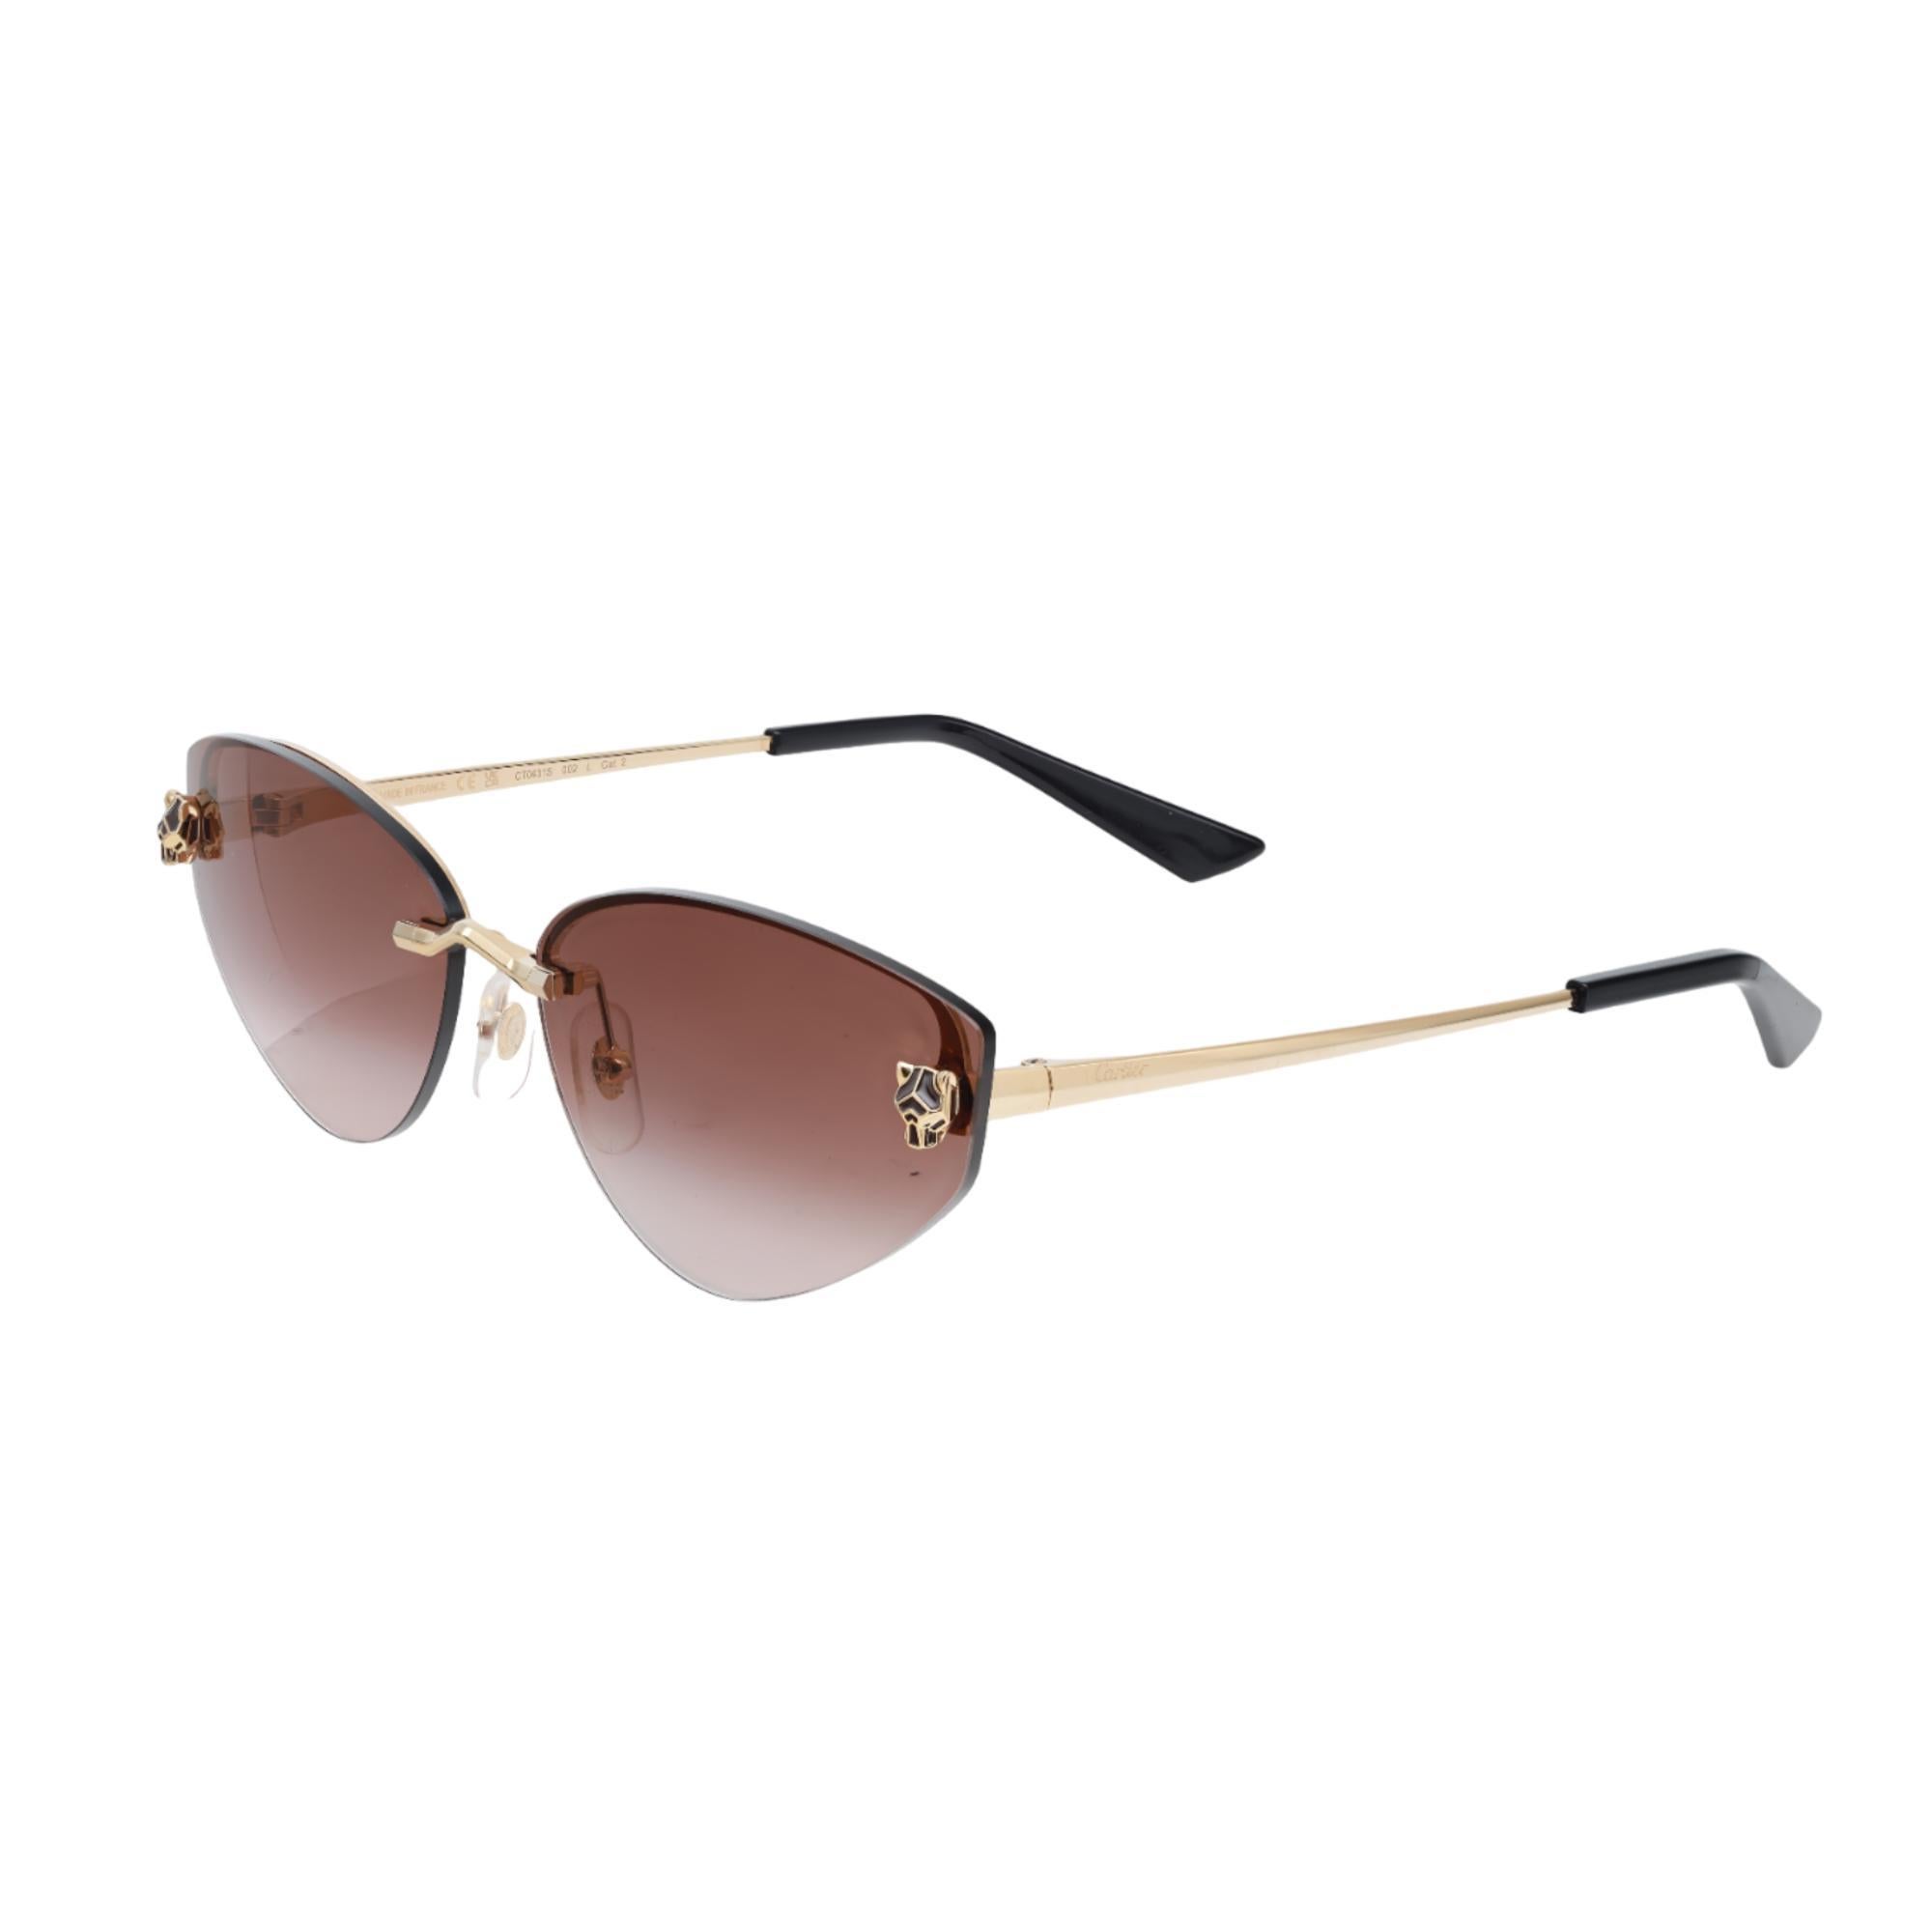 These breathtaking Cartier Panthere De Cartier sunglasses are the epitome of sheer elegance. These sunglasses are crafted in a rimless metal frame with a smooth golden finish for the style-savvy people of today. Showcasing UV-protected plastic cat